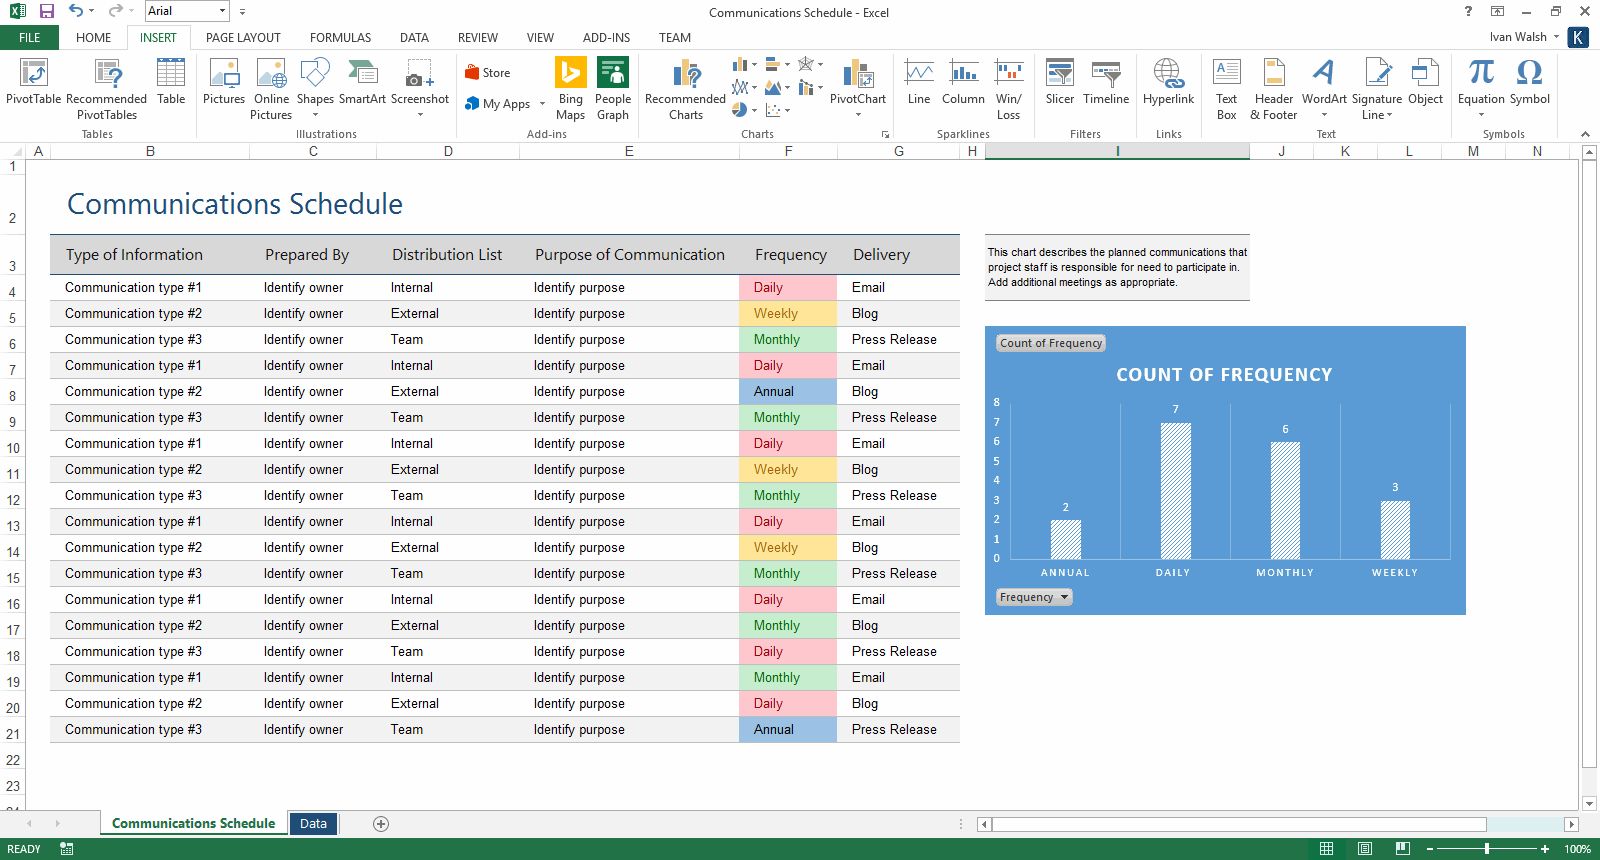 Business Plan Template Excel